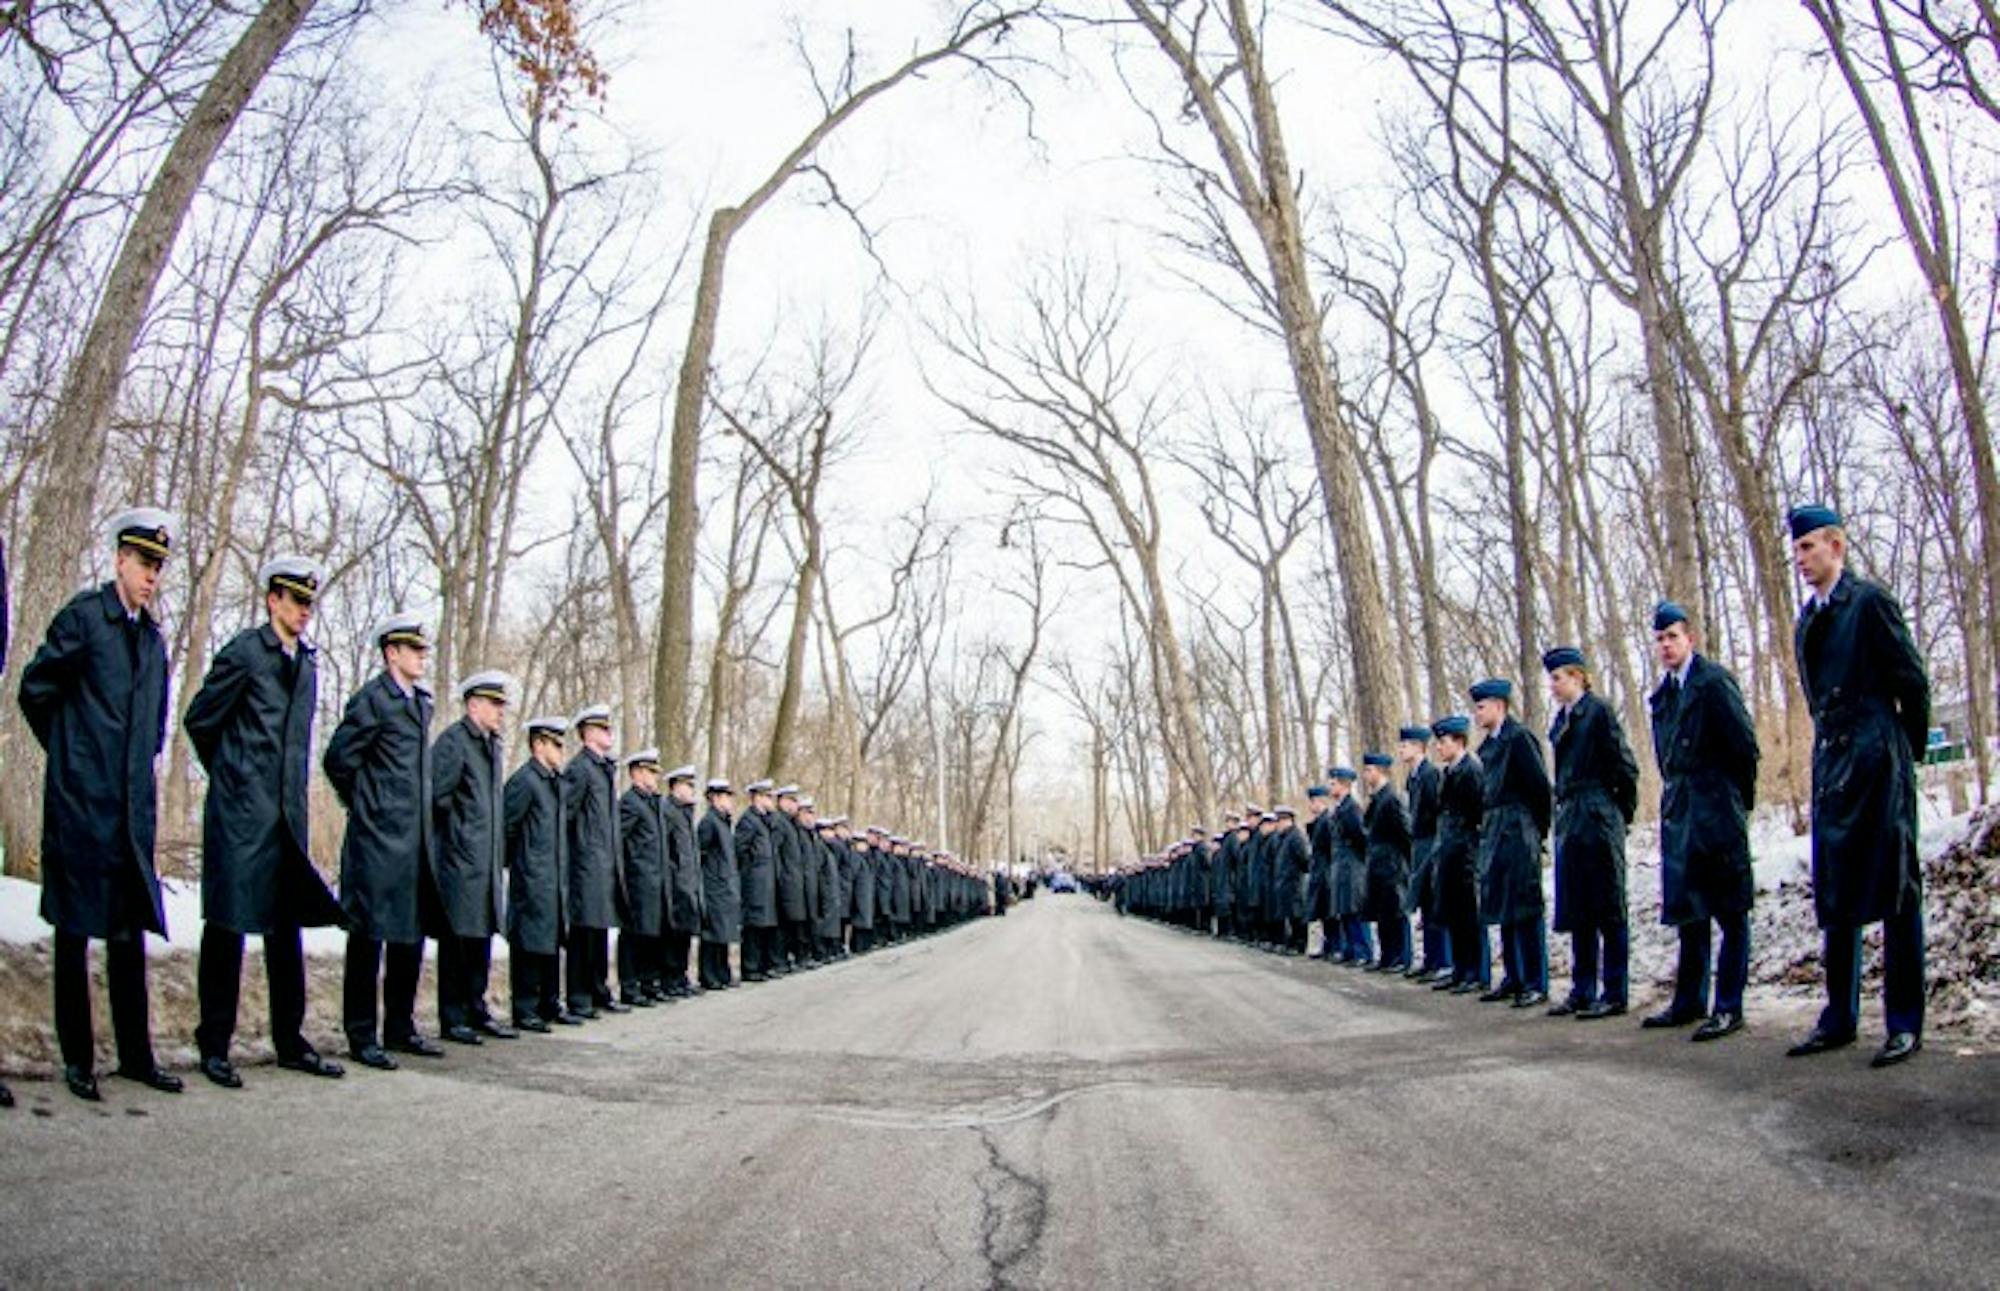 University midshipmen (left) and cadets (right) line Saint Mary’s Road to honor the life of Fr. Hesburgh during the funeral procession March 4. Many students, faculty and staff joined the procession.